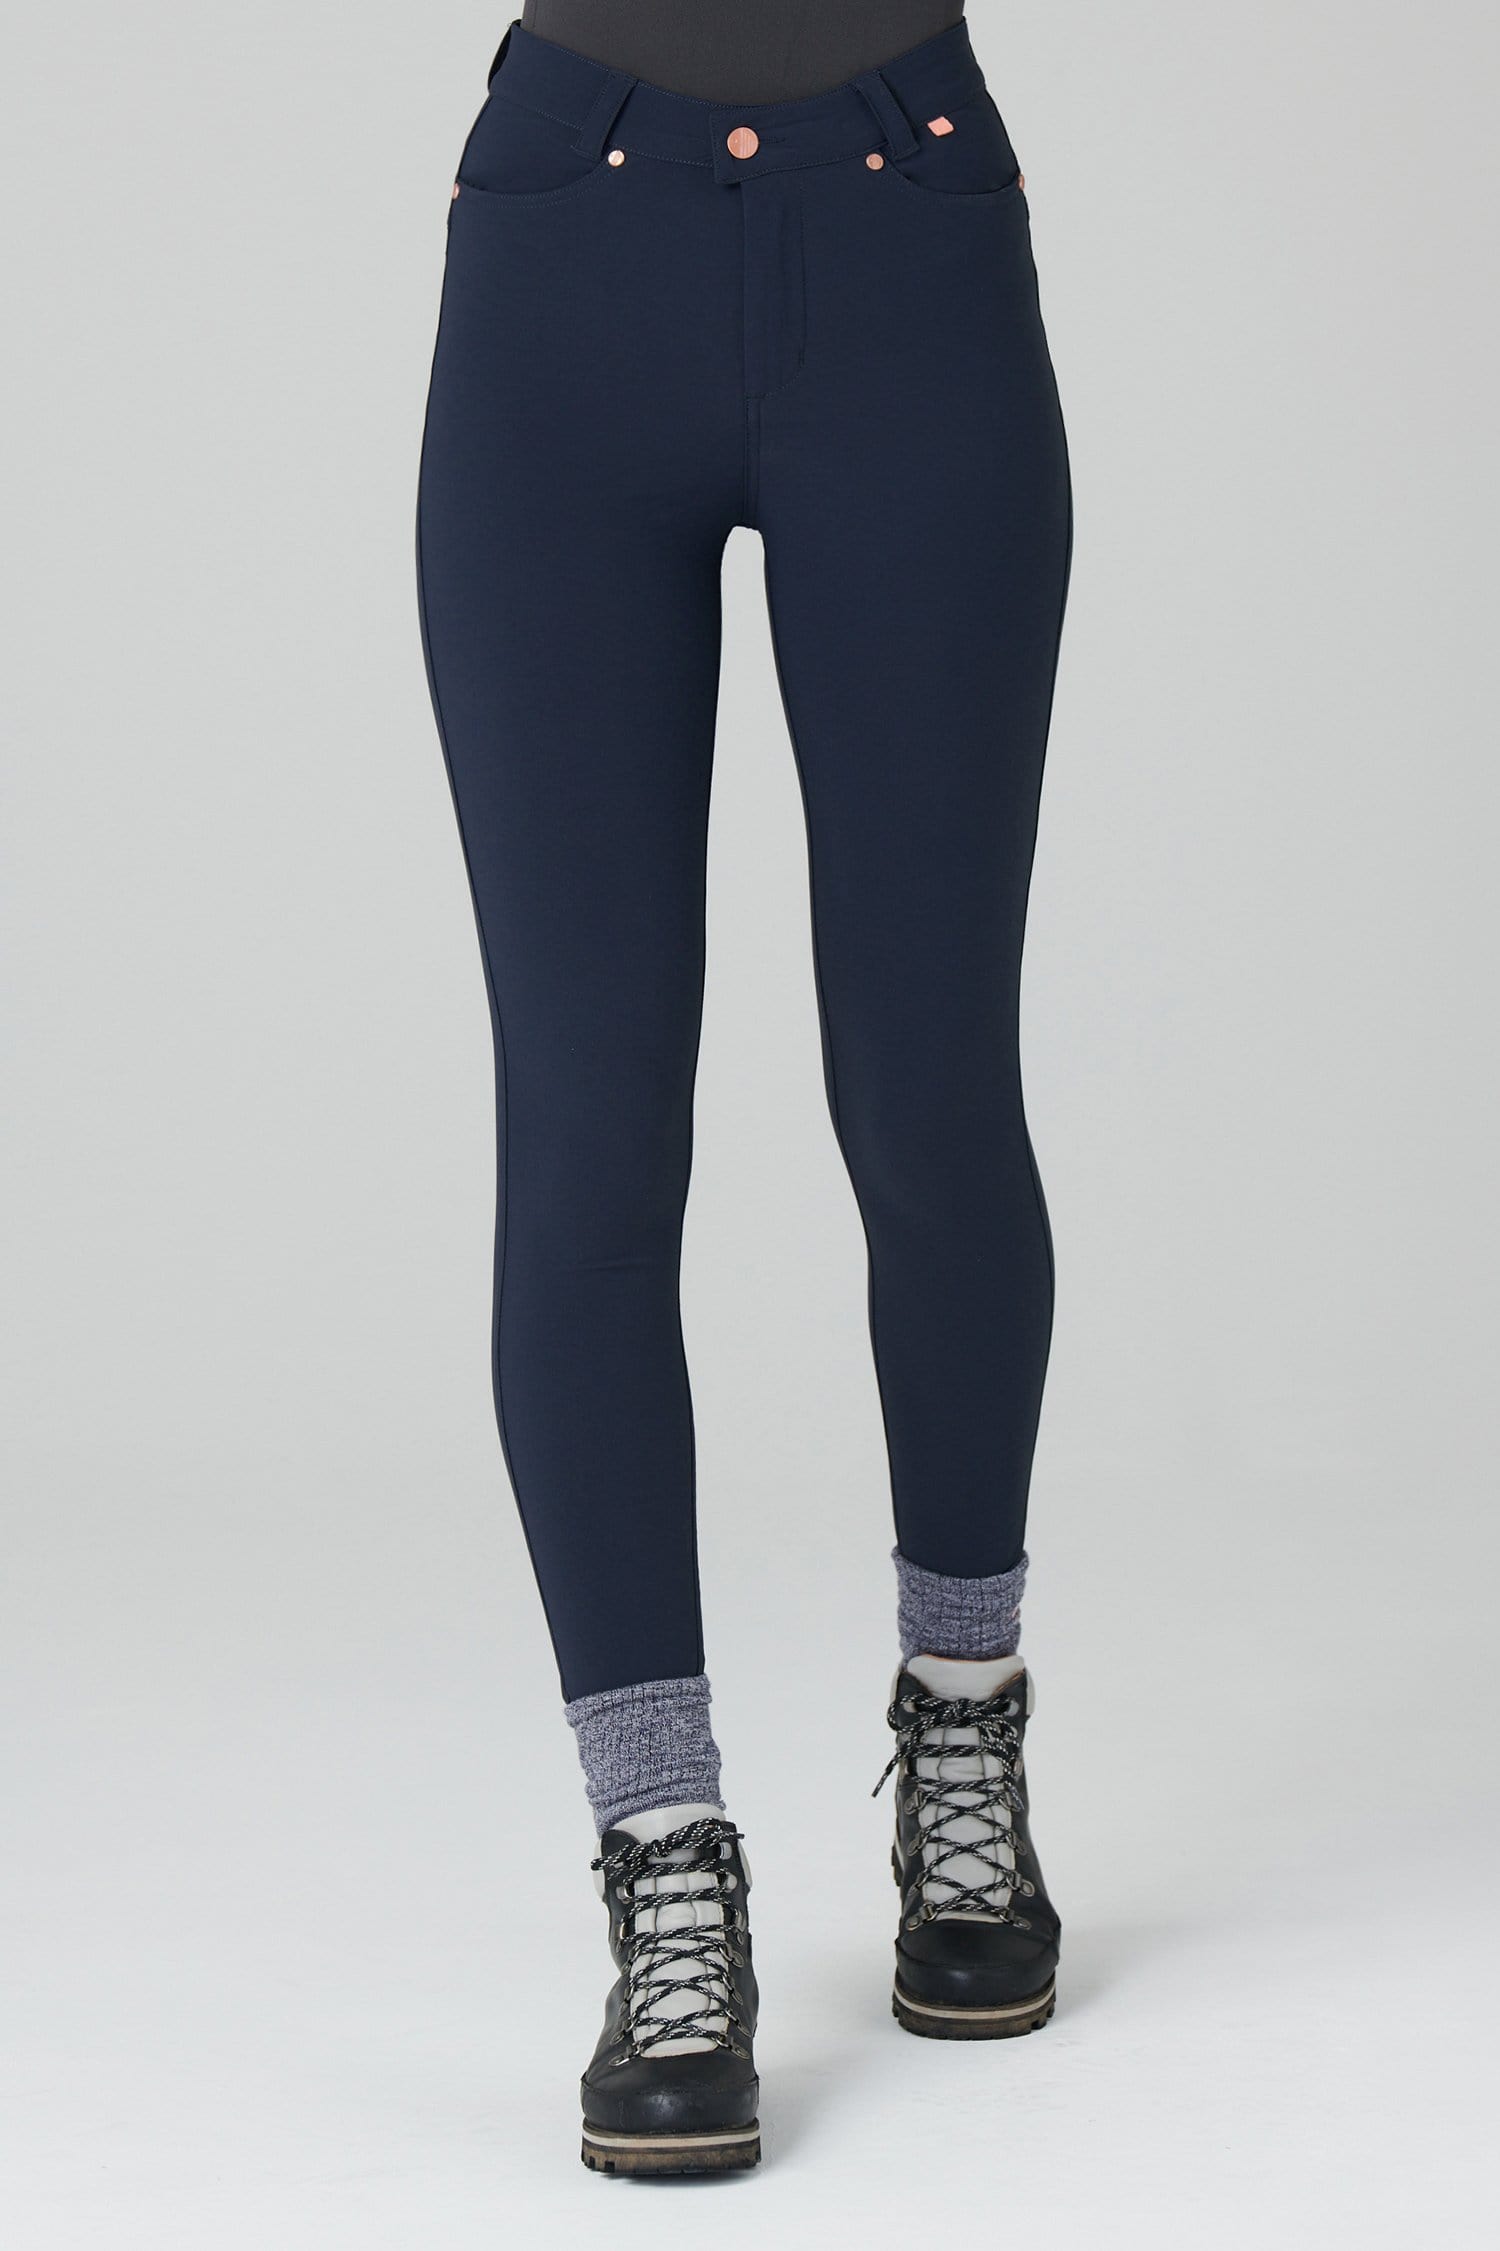 Thermal Skinny Outdoor Trousers - Deep Navy - 30p / Uk12 - Womens - Acai Outdoorwear